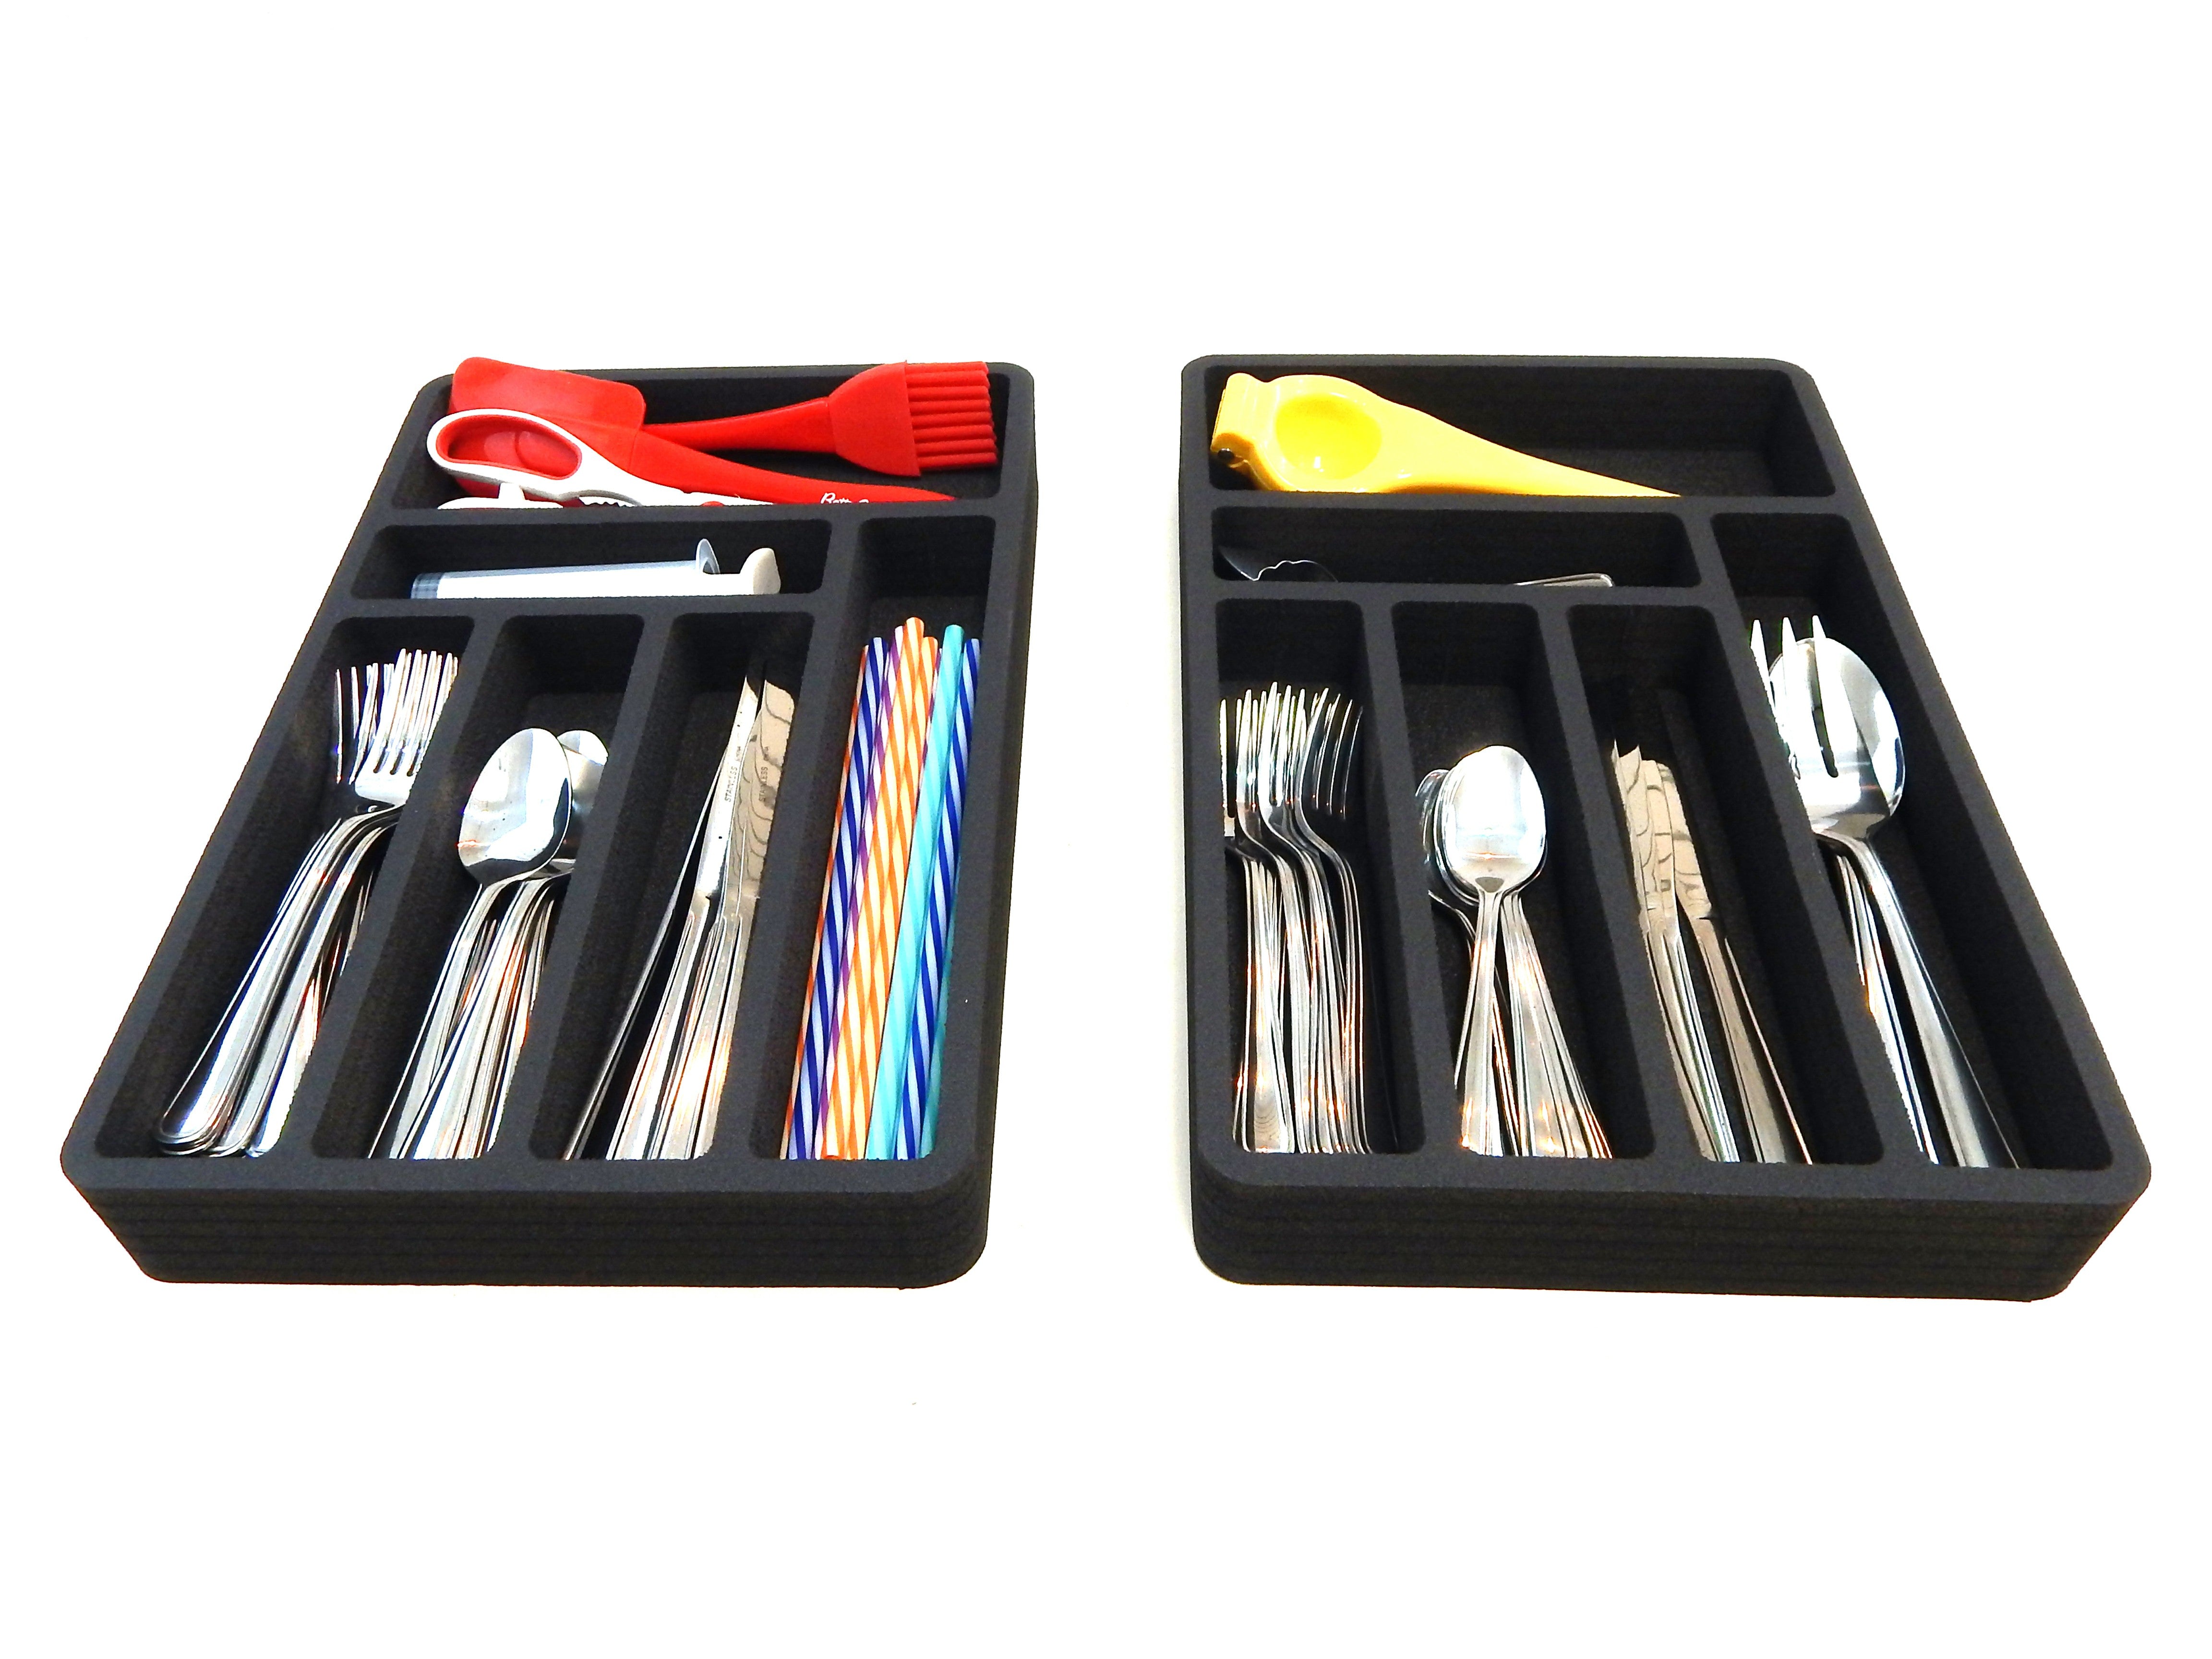 Flatware Silverware Drawer Organizer for Rv and Campers Cutlery Forks Knives Spoons Waterproof Compact Tray Insert 20.5 X 15.9 X 2 Inch 12 Slot